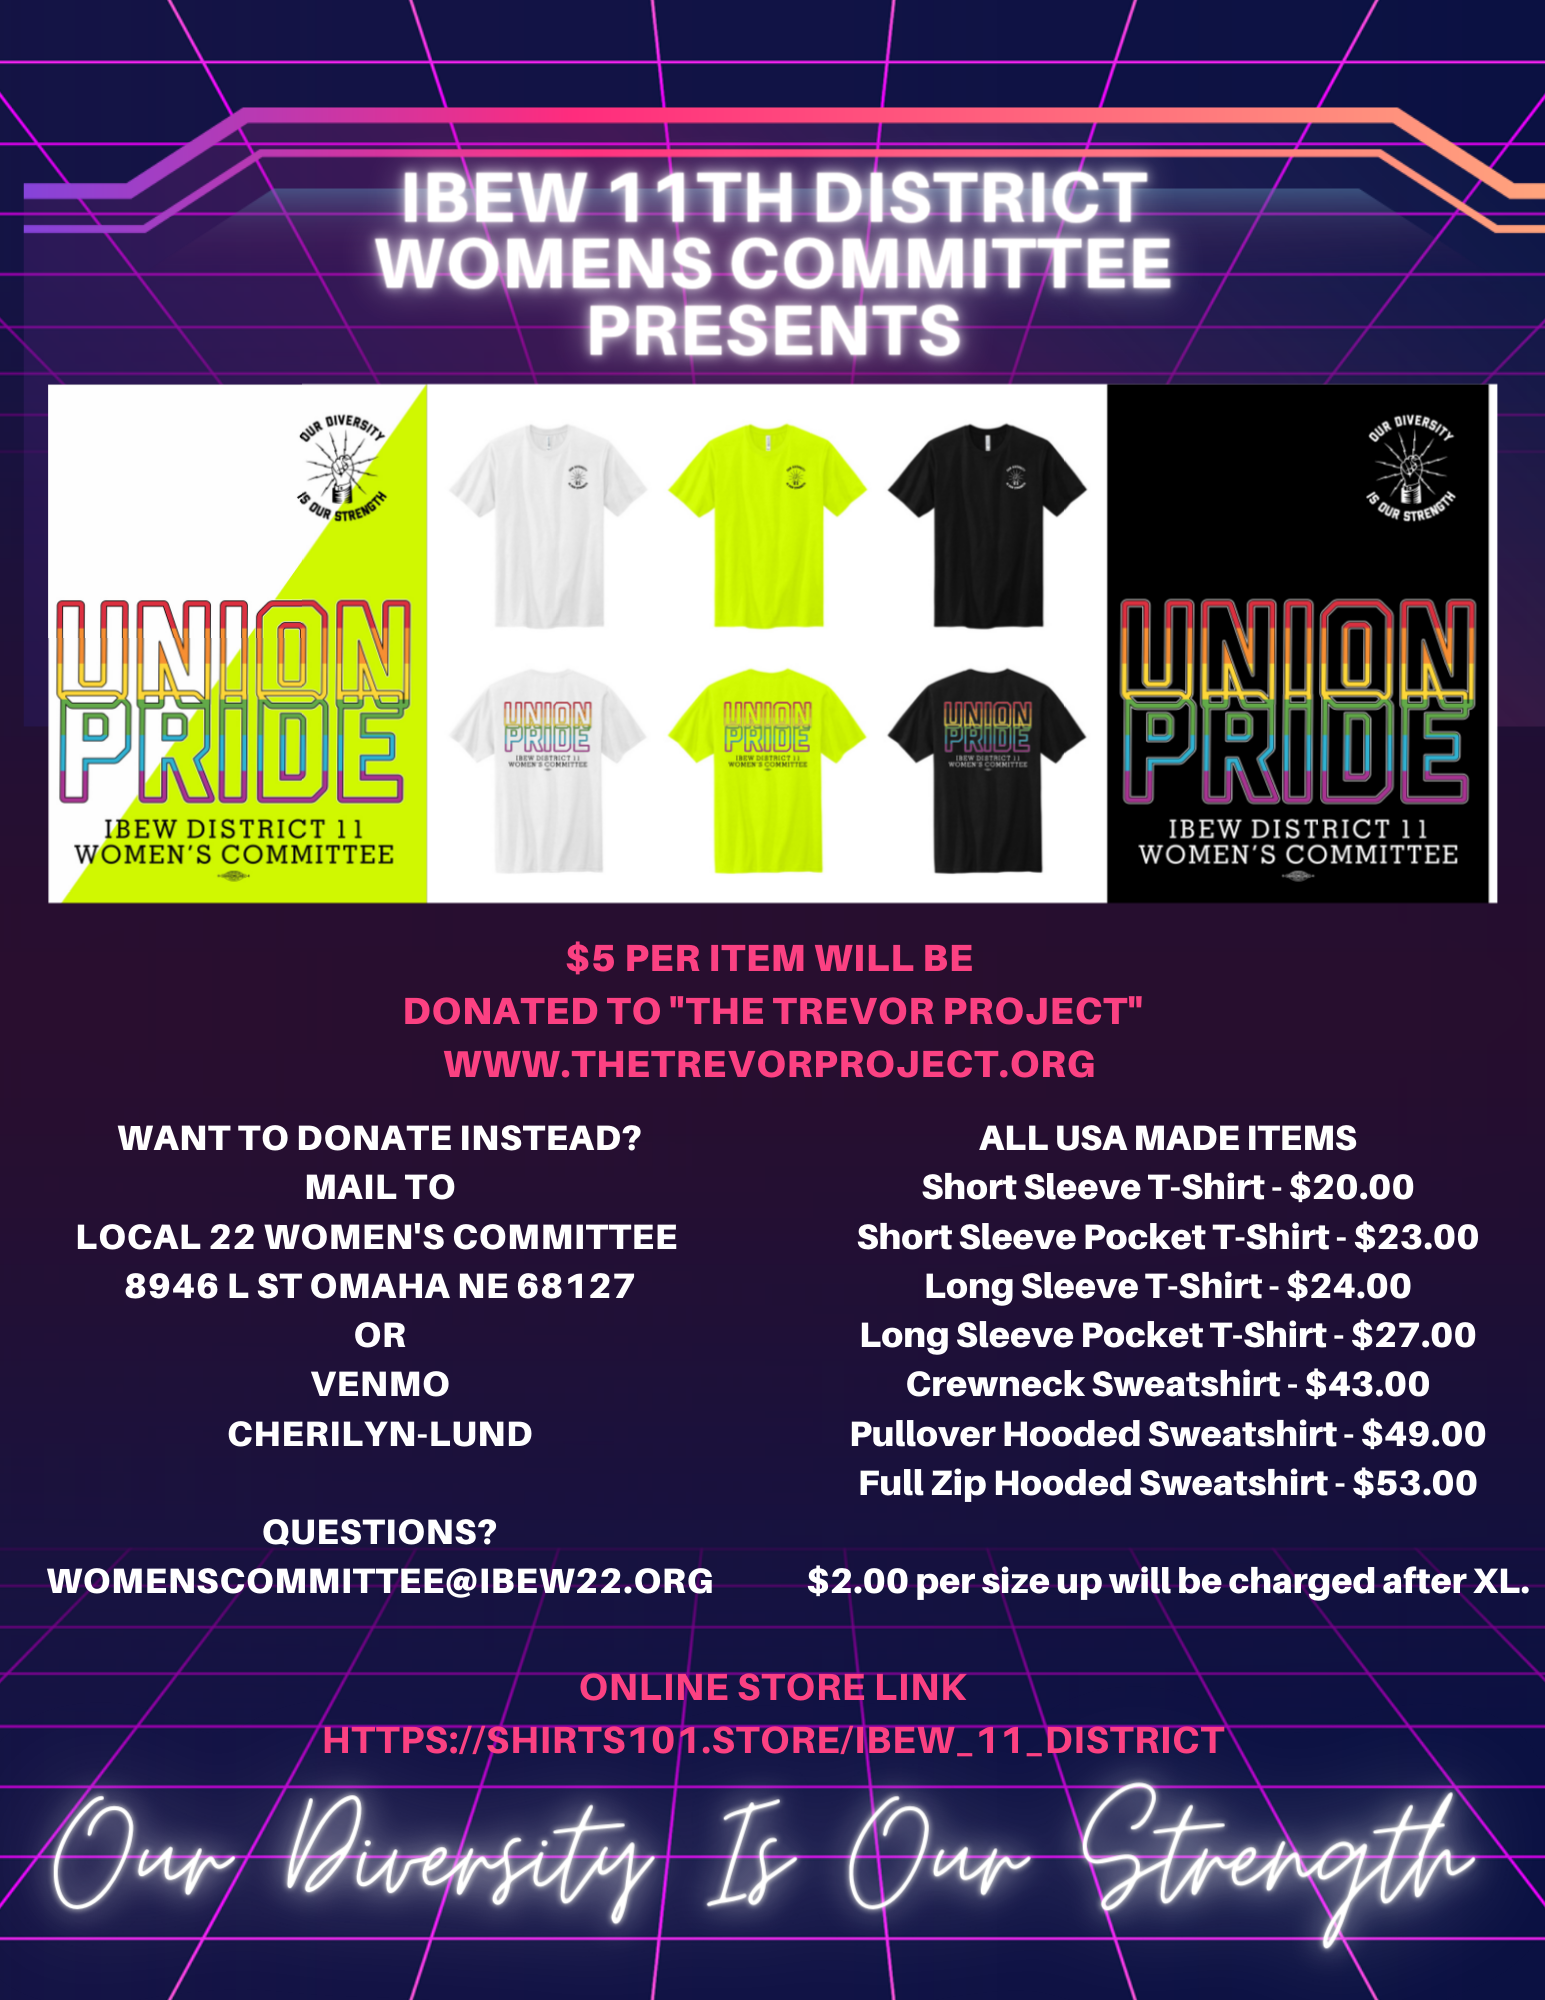 IBEW 11th District Womens Committee Fundraiser